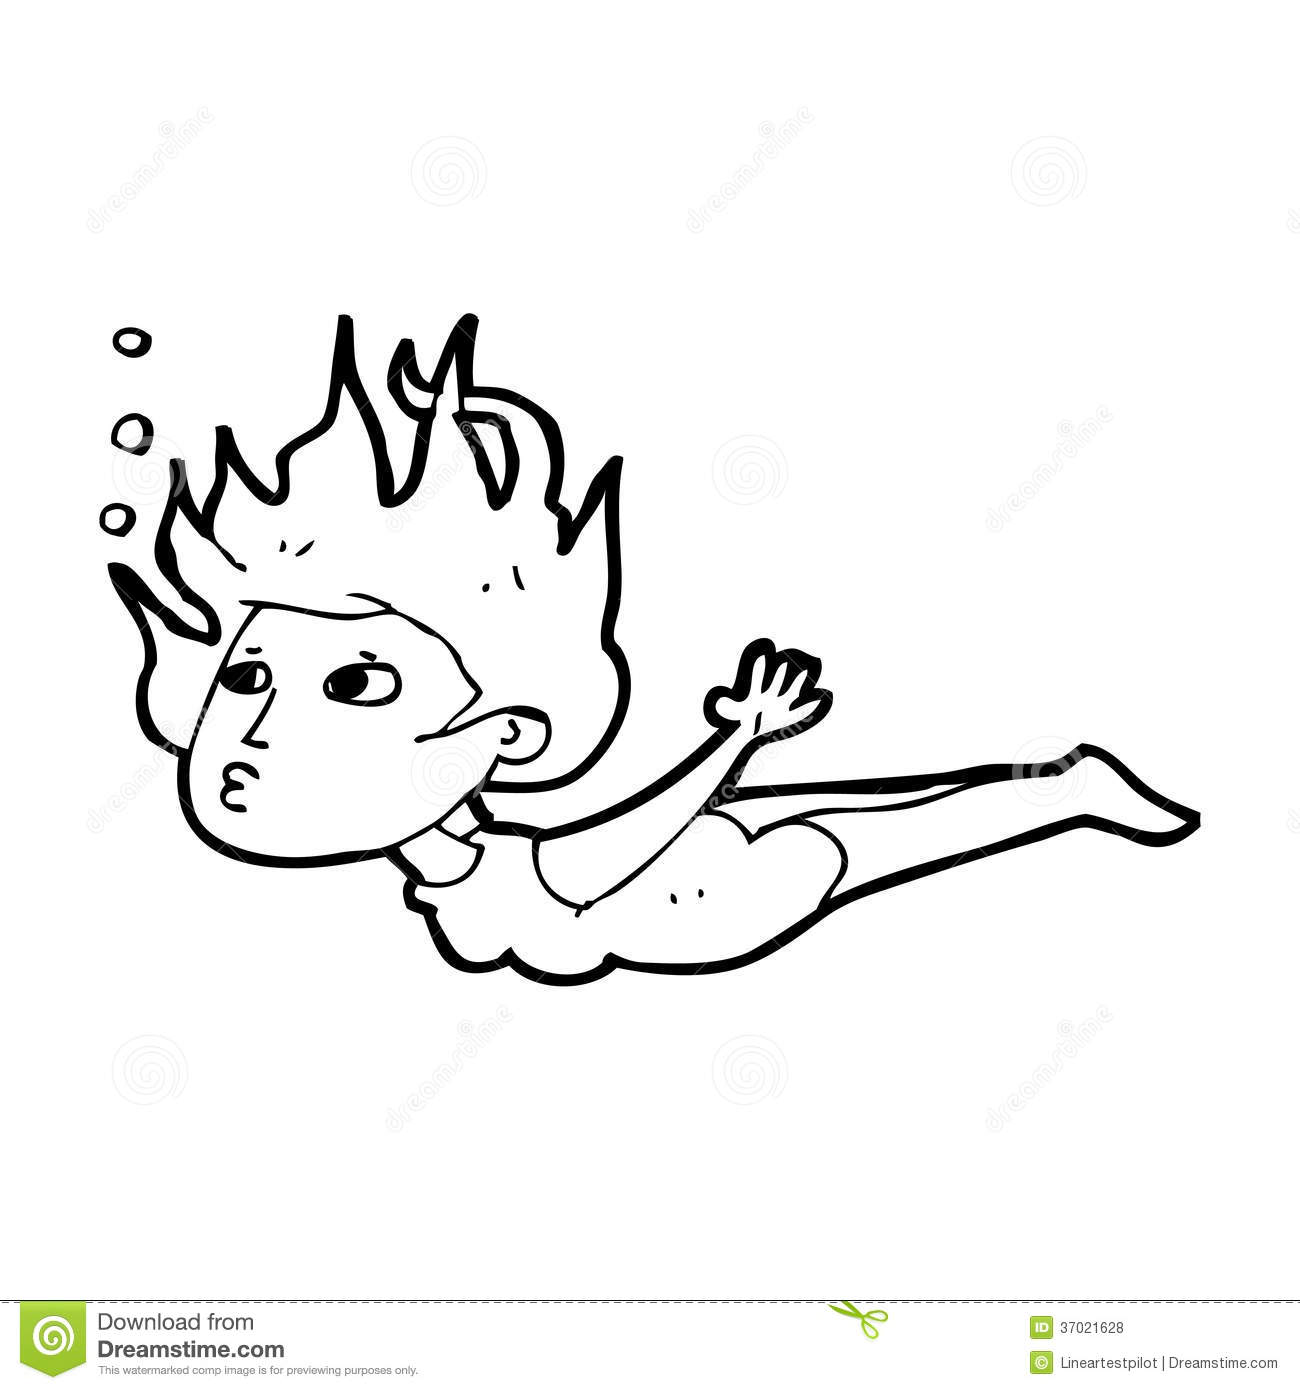 Swimming Cartoon Images Black And White Black And White Line Cartoon